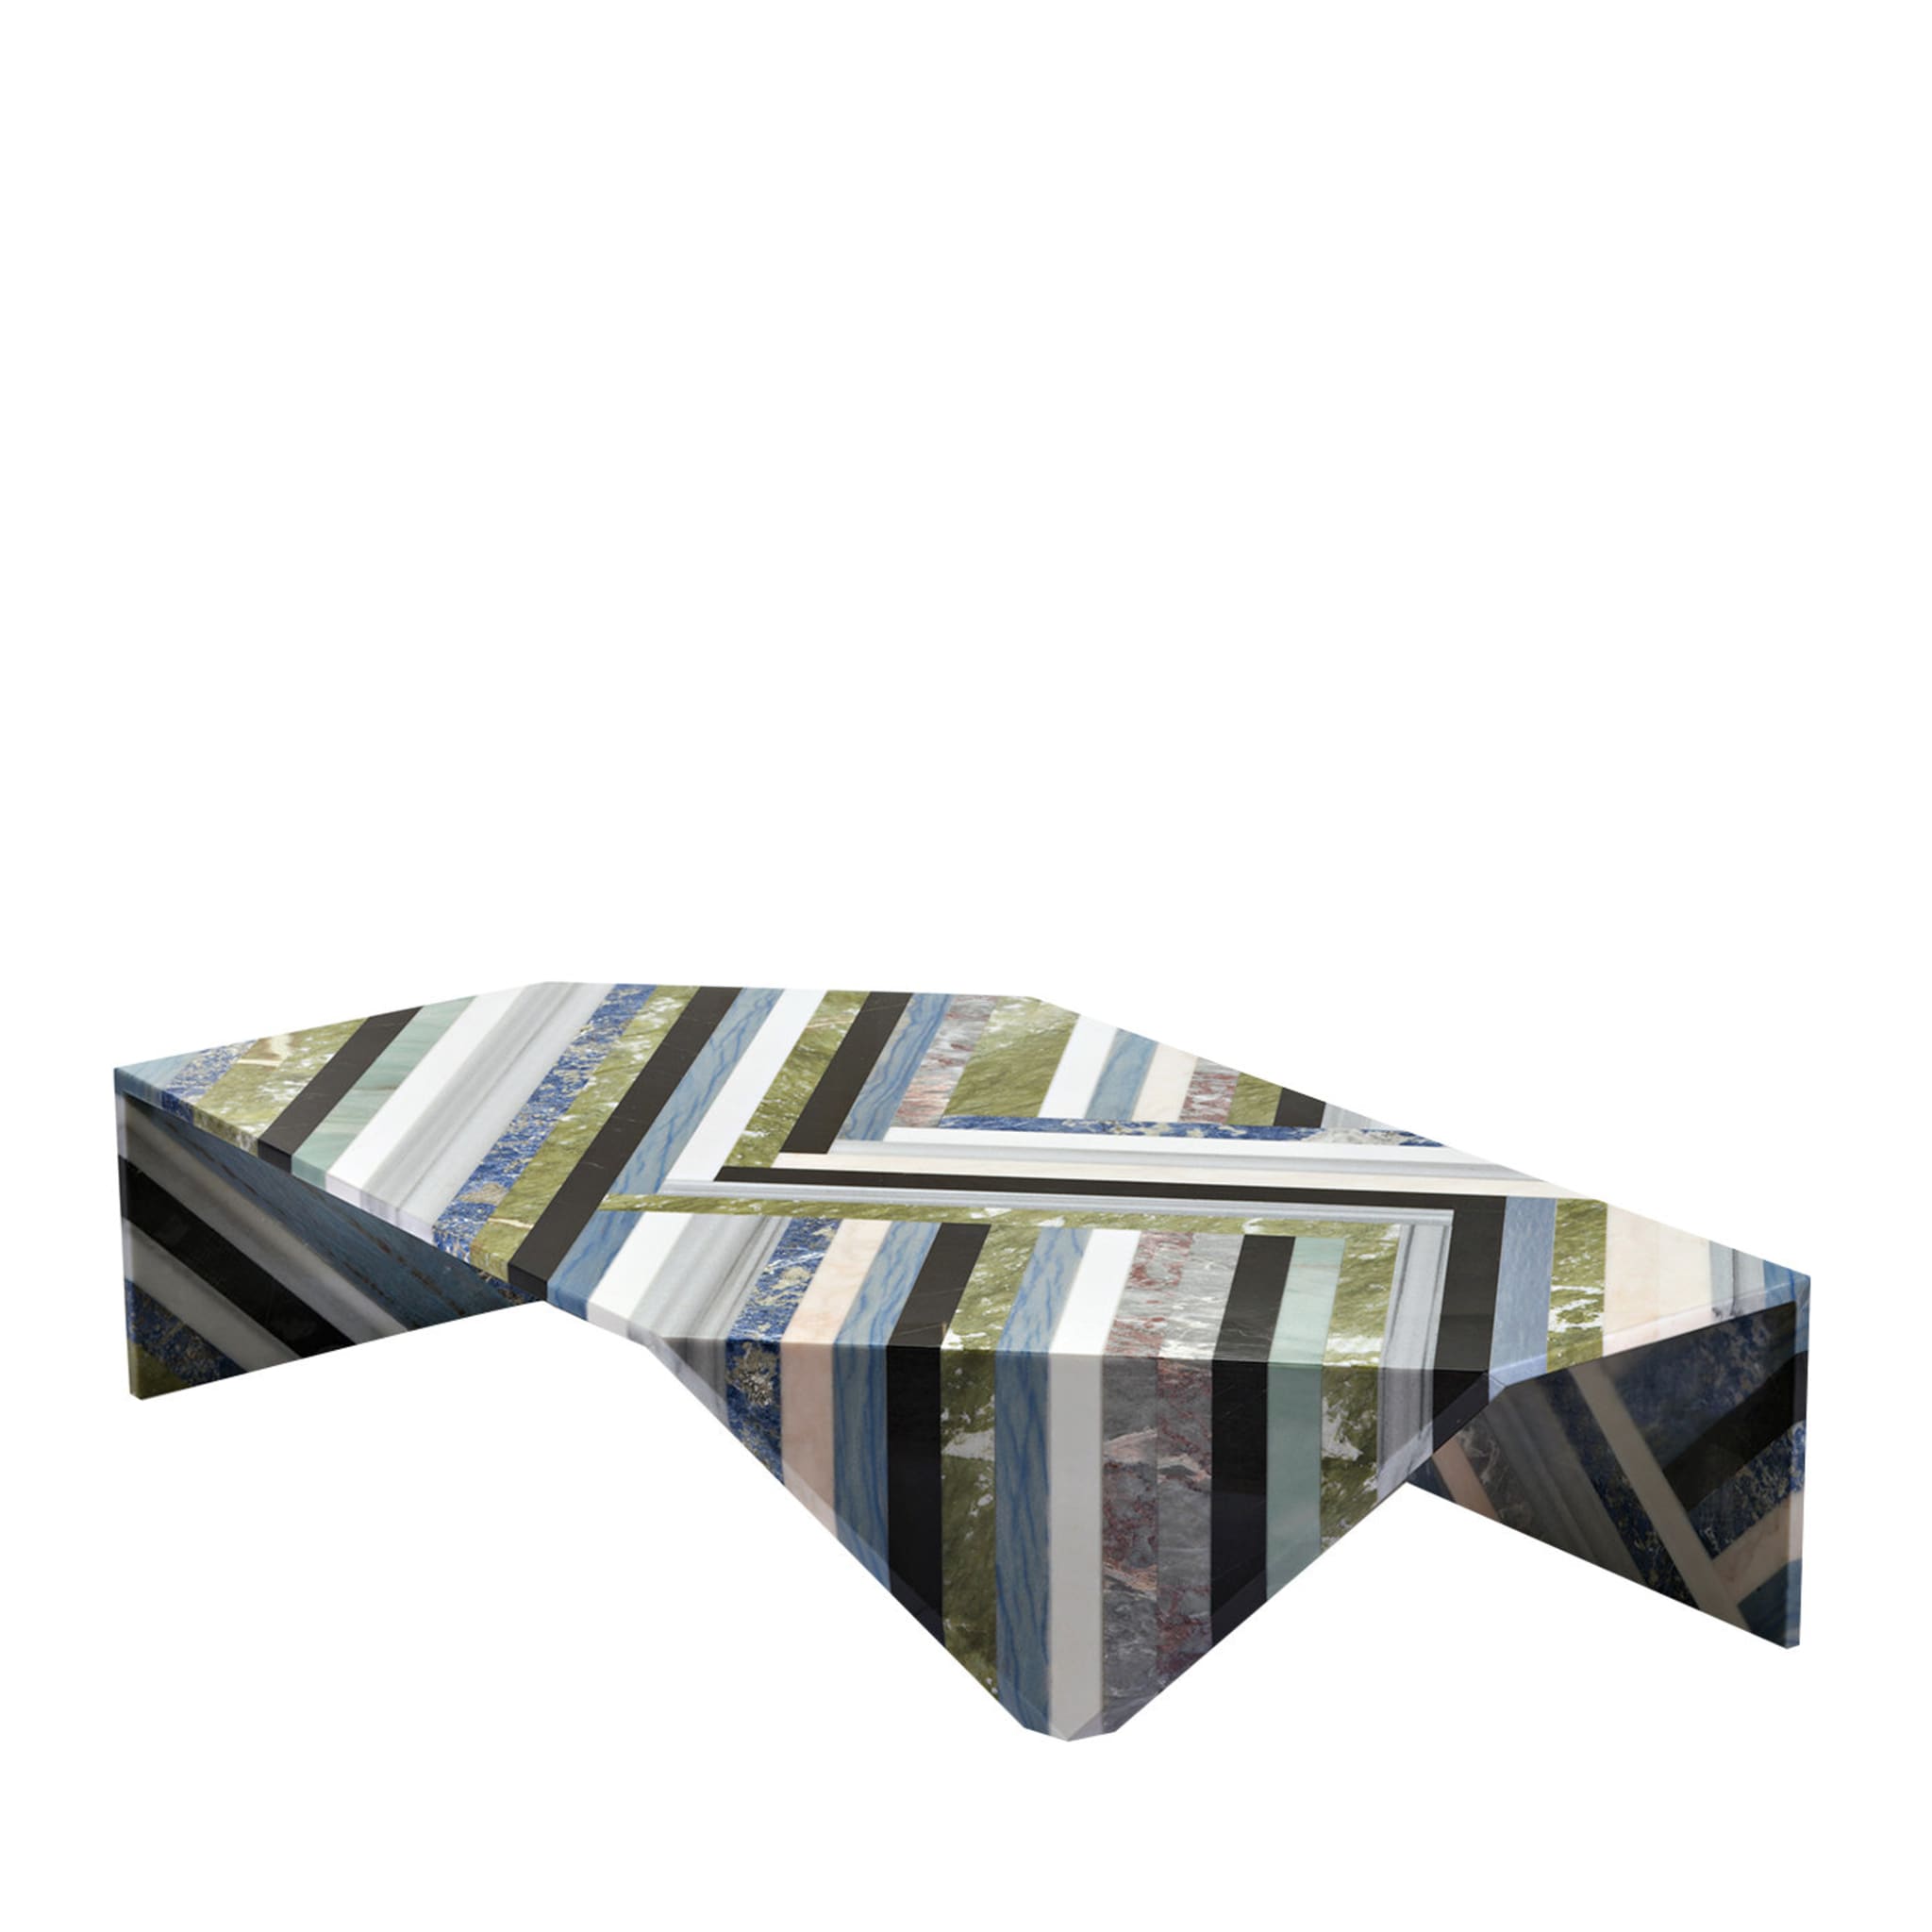 Origami Stripes Coffee Table I by Patricia Urquiola - Main view